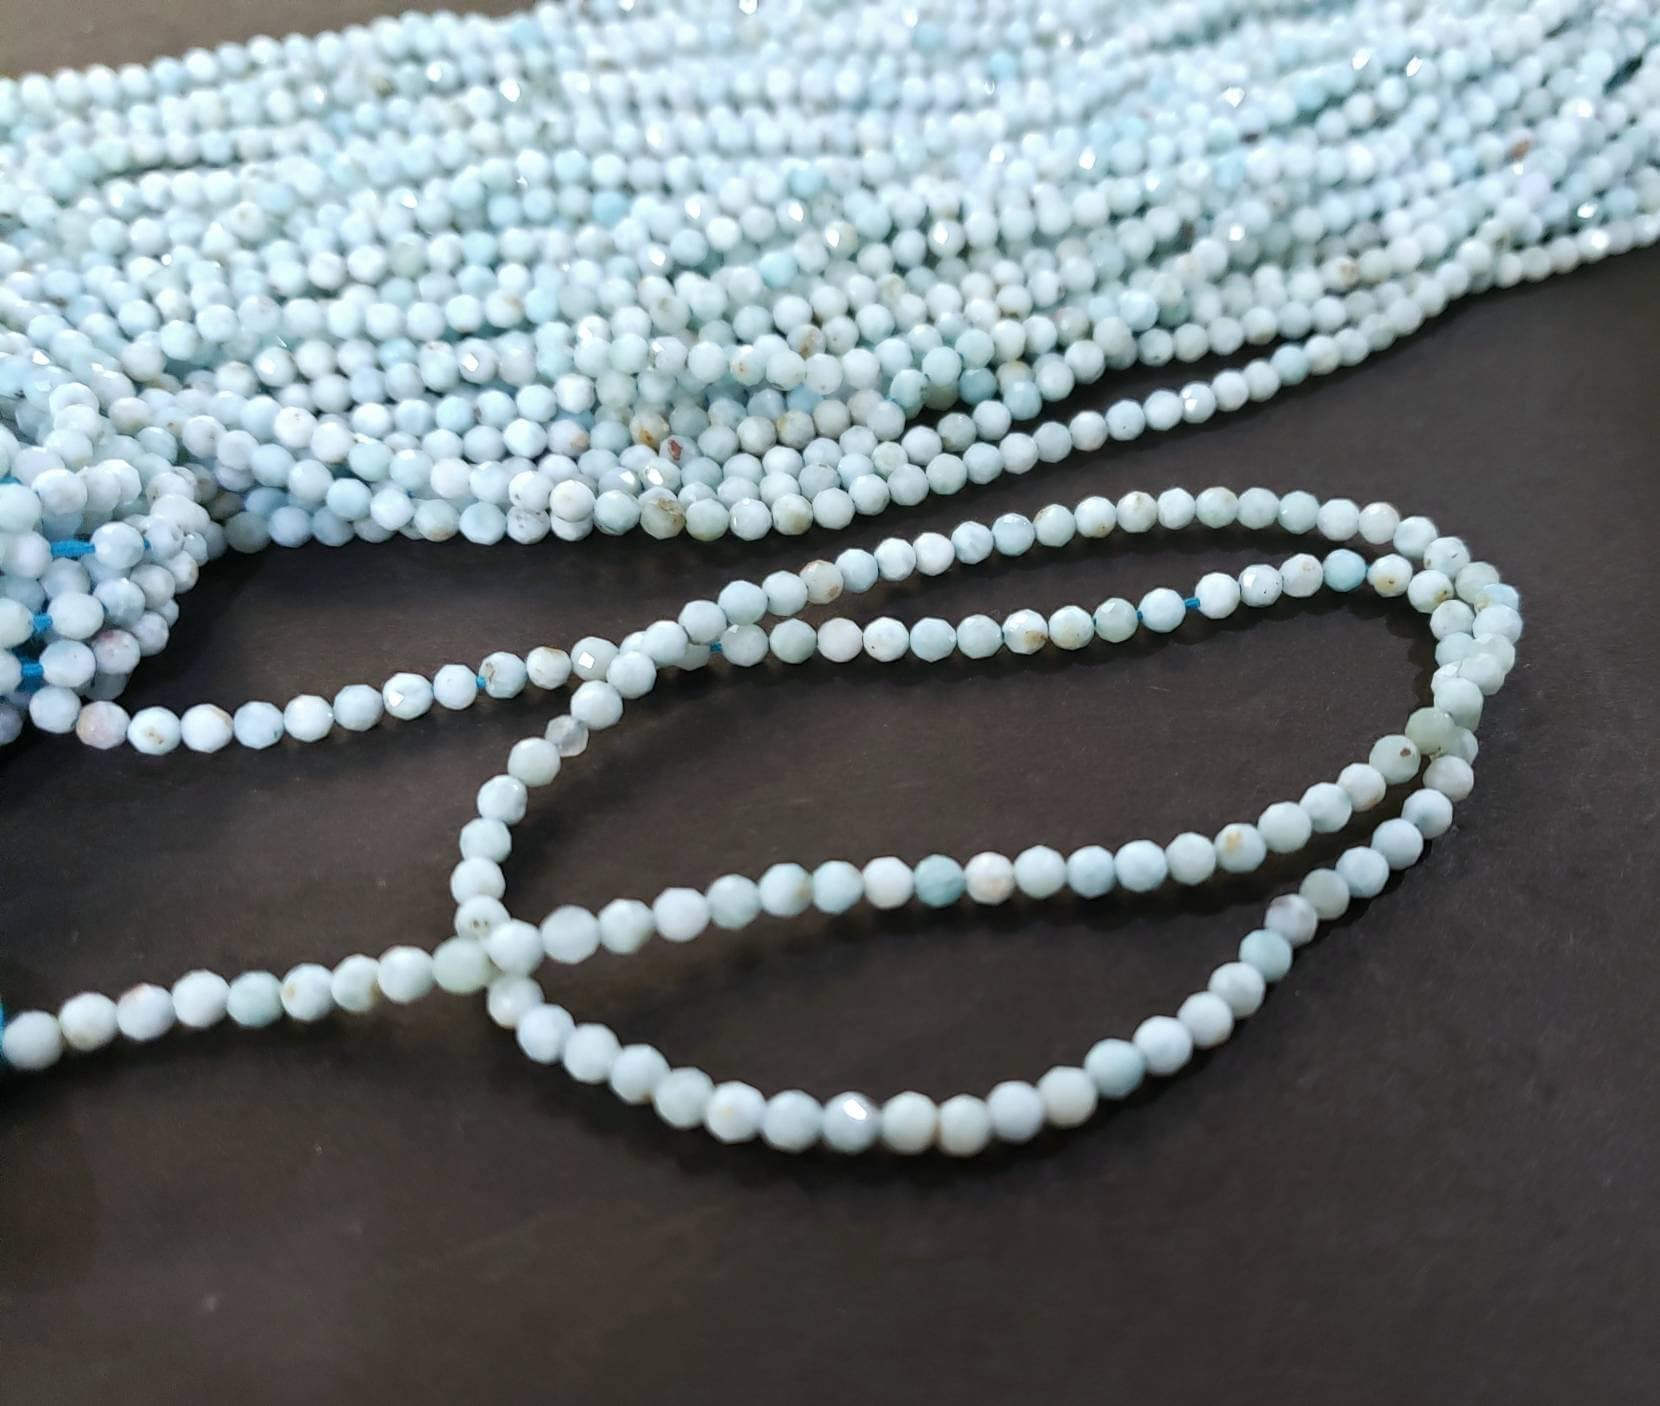 Genuine Larimar 2.5mm faceted round Beads 12.25&quot; Strand for jewelry making, healing gemstone beads, high Quality Ocean blue gems.